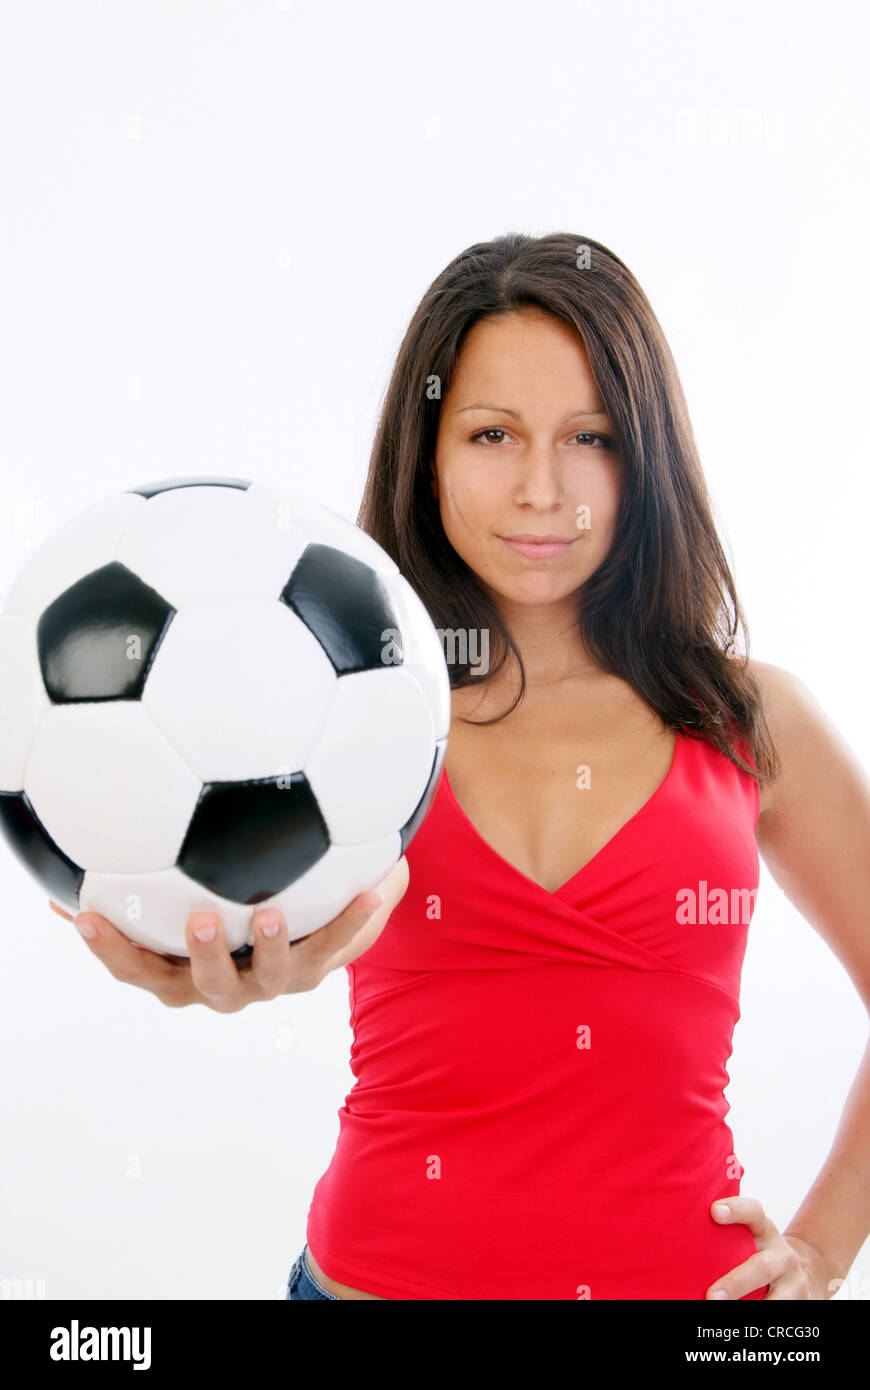 young cute woman in red top with soccer ball Stock Photo